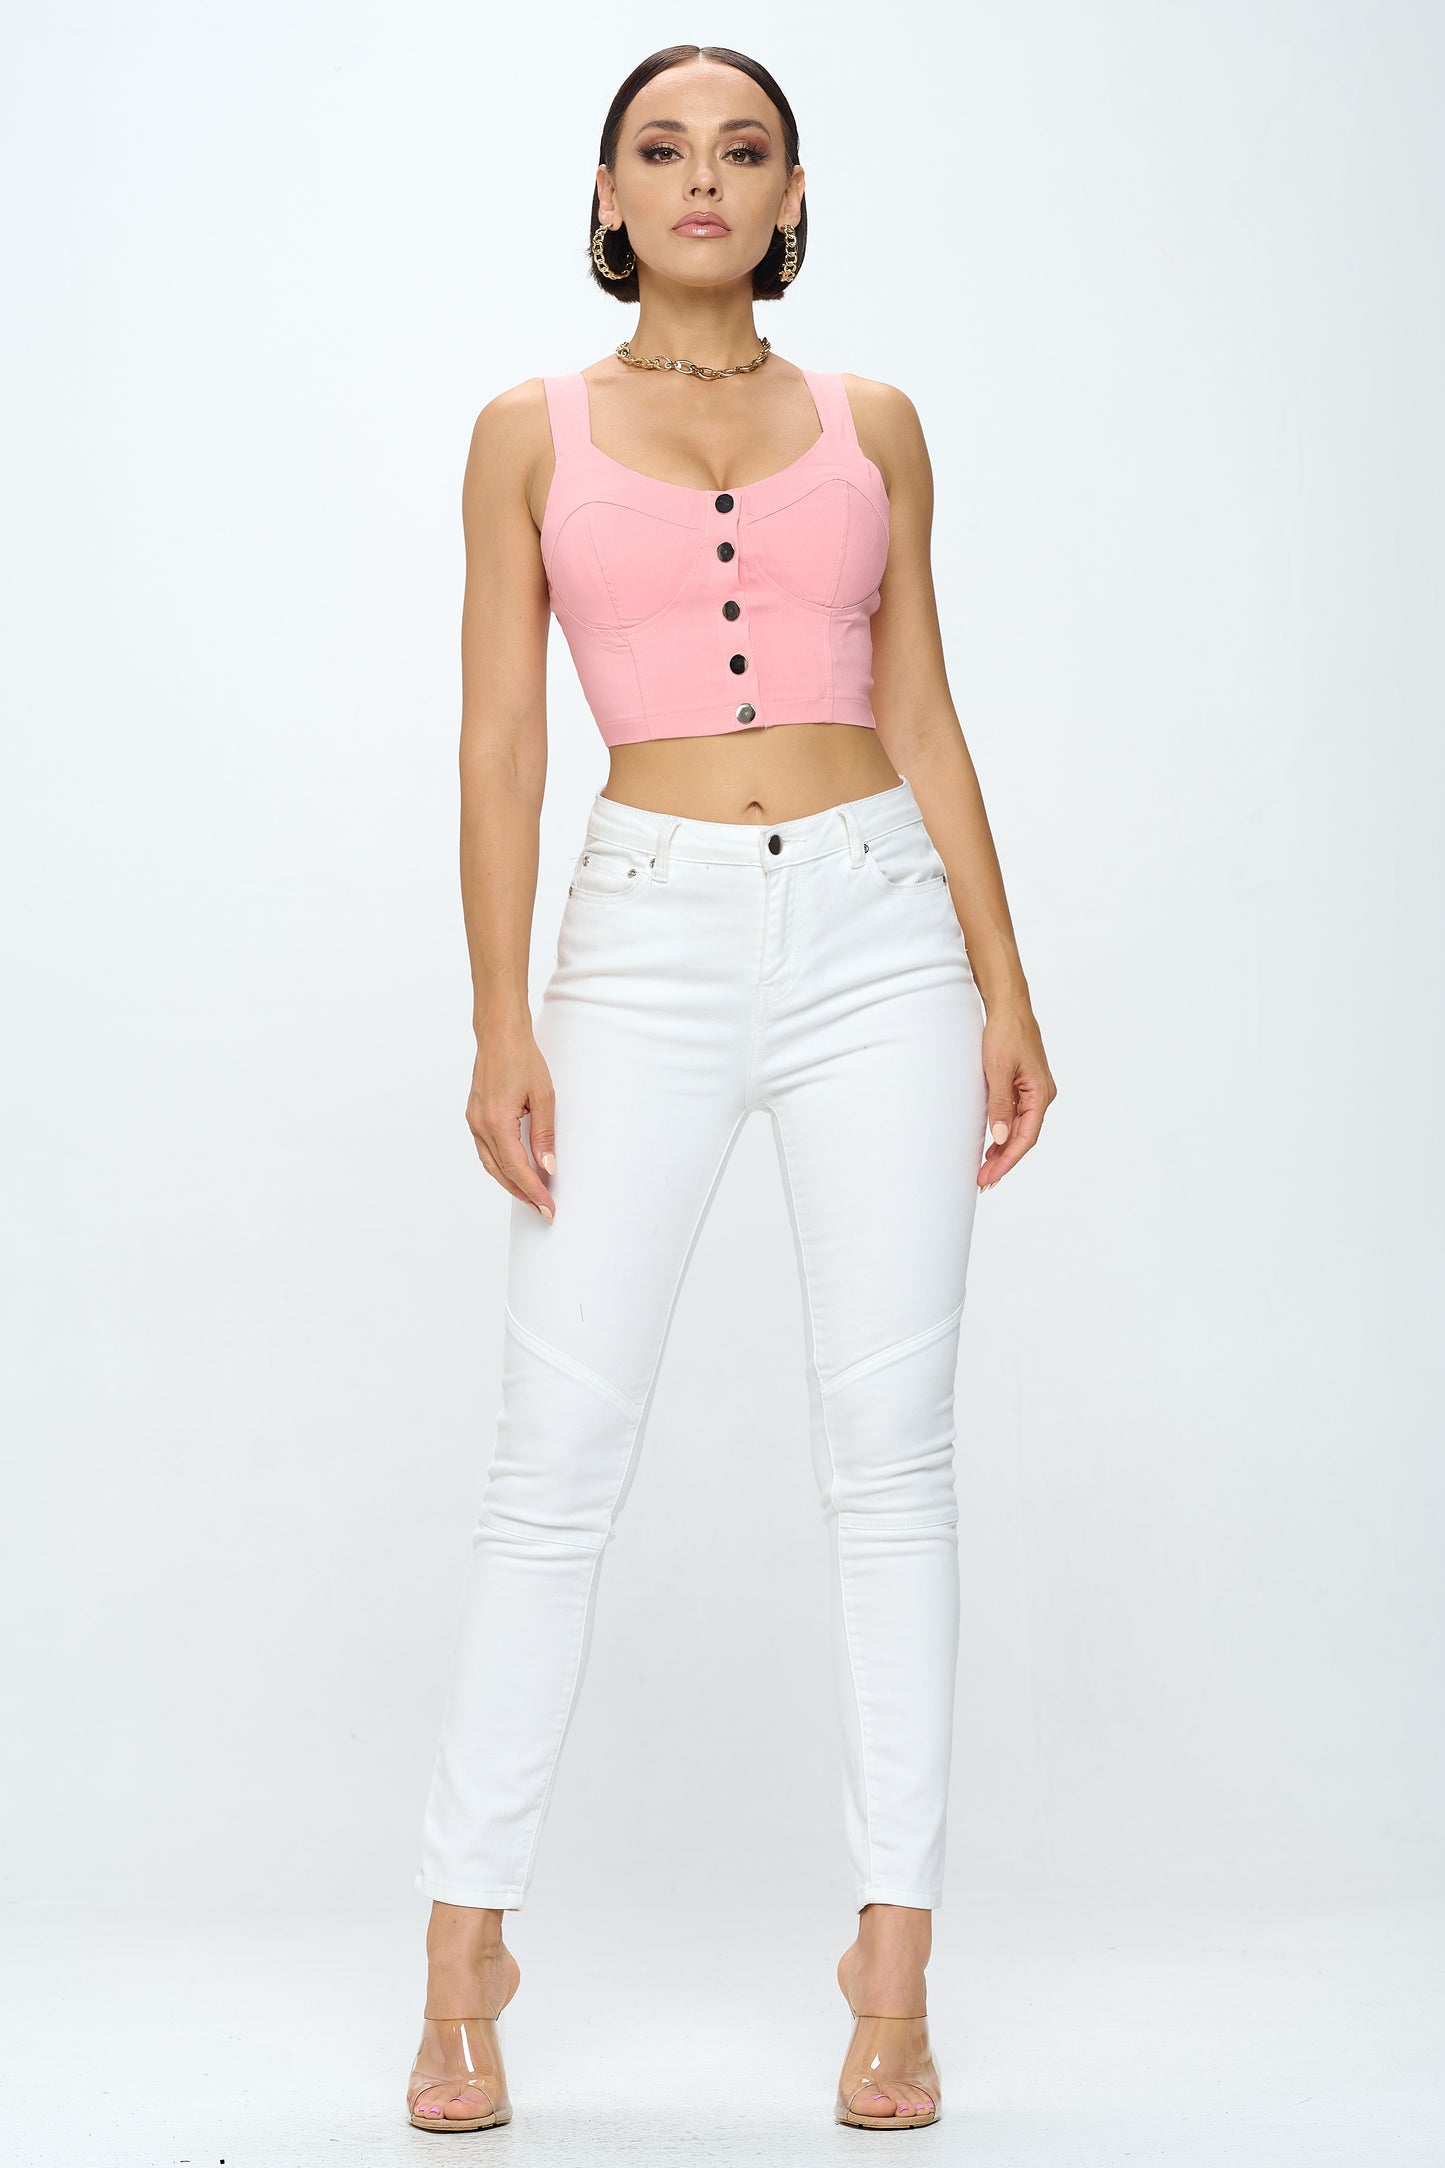 FRONT BUTTON CLOSURE CROP TANK TOP